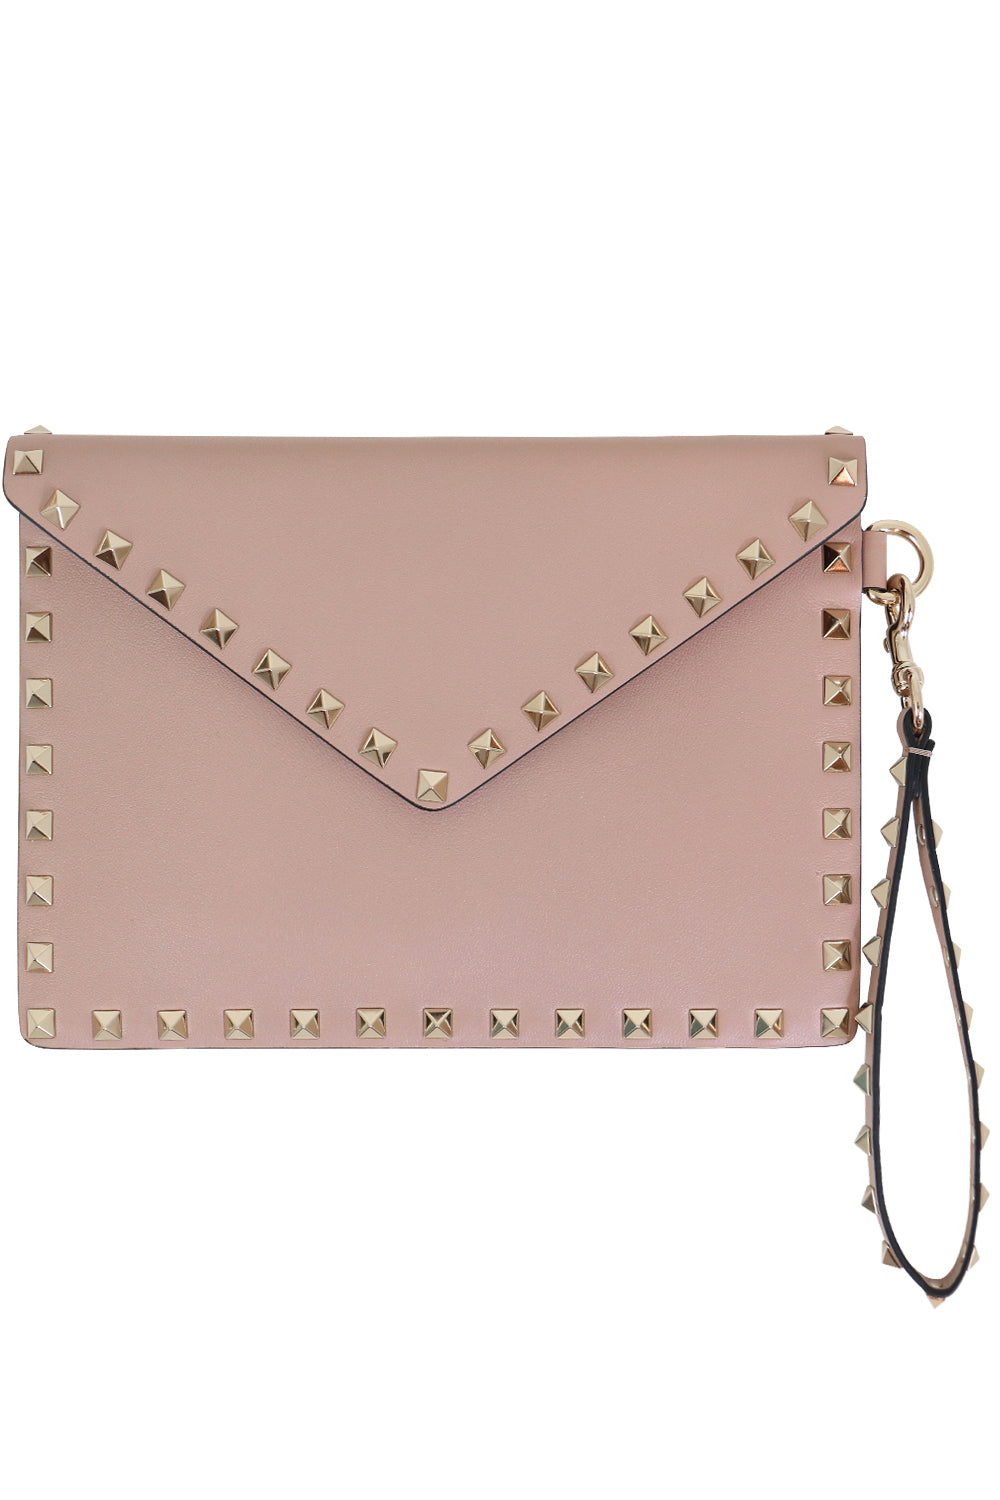 VALENTINO BAGS PINK SMALL ROCKSTUD ENVELOPE POUCH SMOOTH LEATHER POUDRE